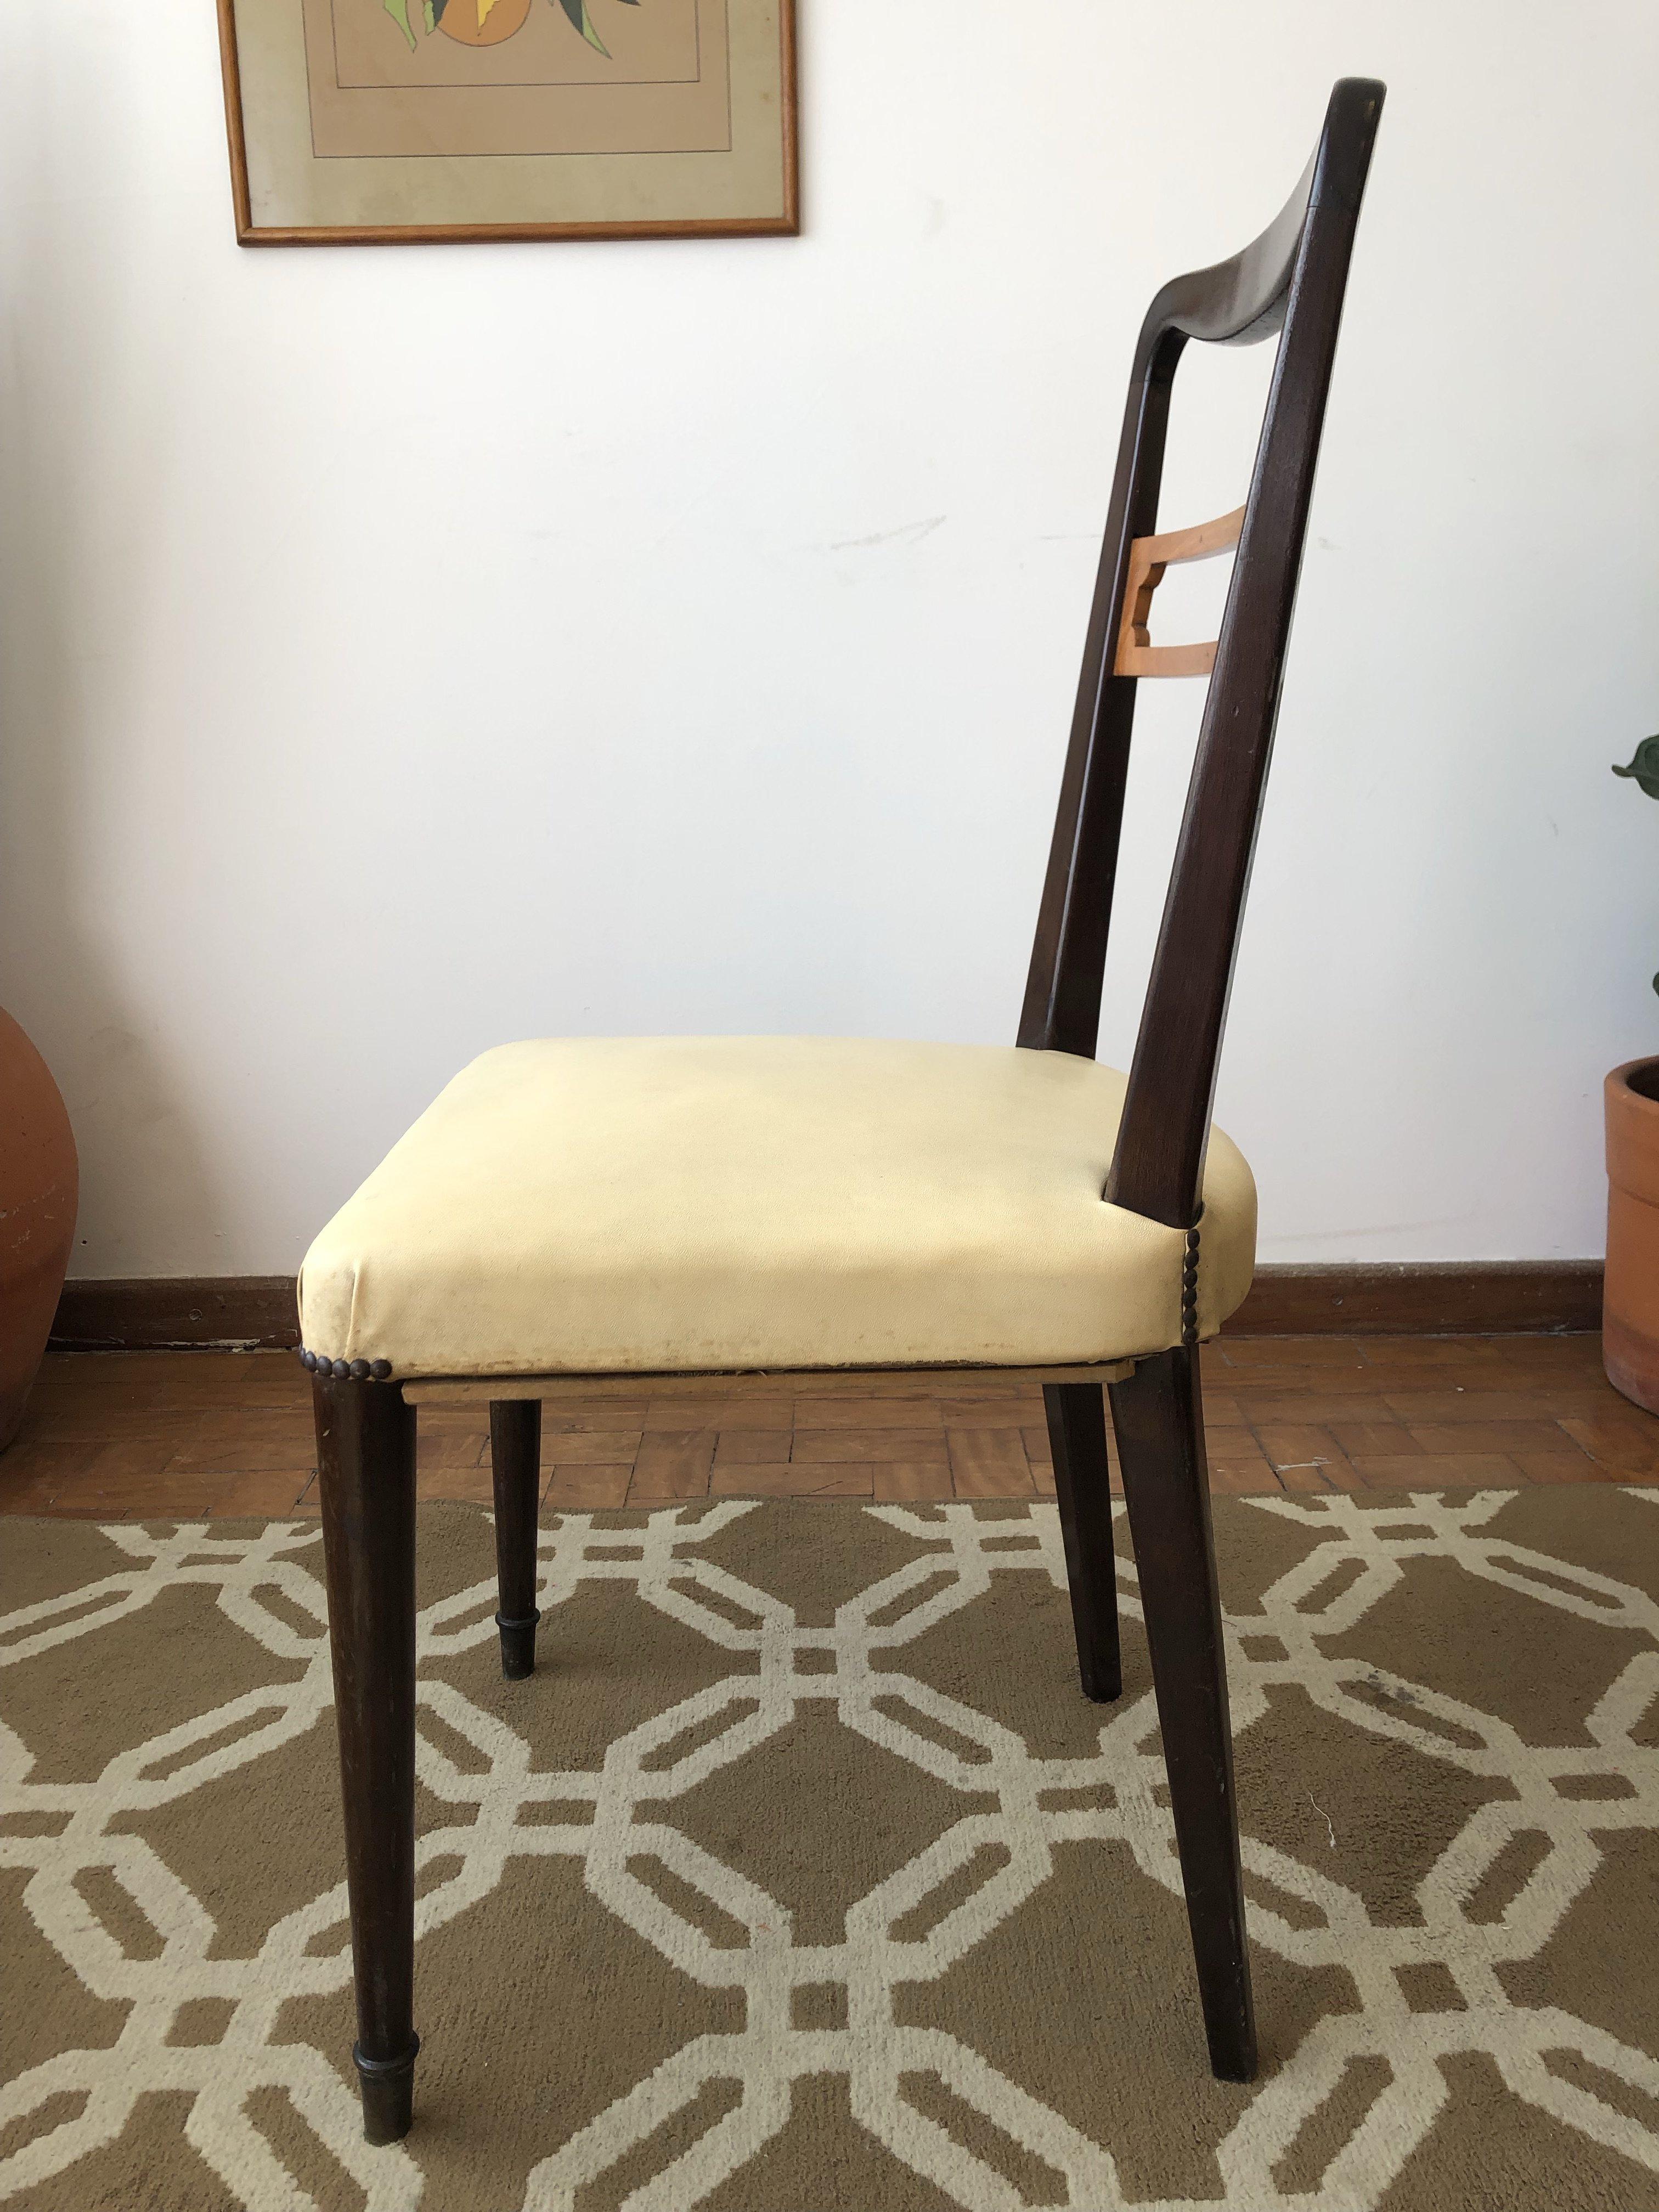 Mid-20th Century Mid-Century Modern Brazilian Light Yellow Chairs in Solid Wood, Set of 4 For Sale